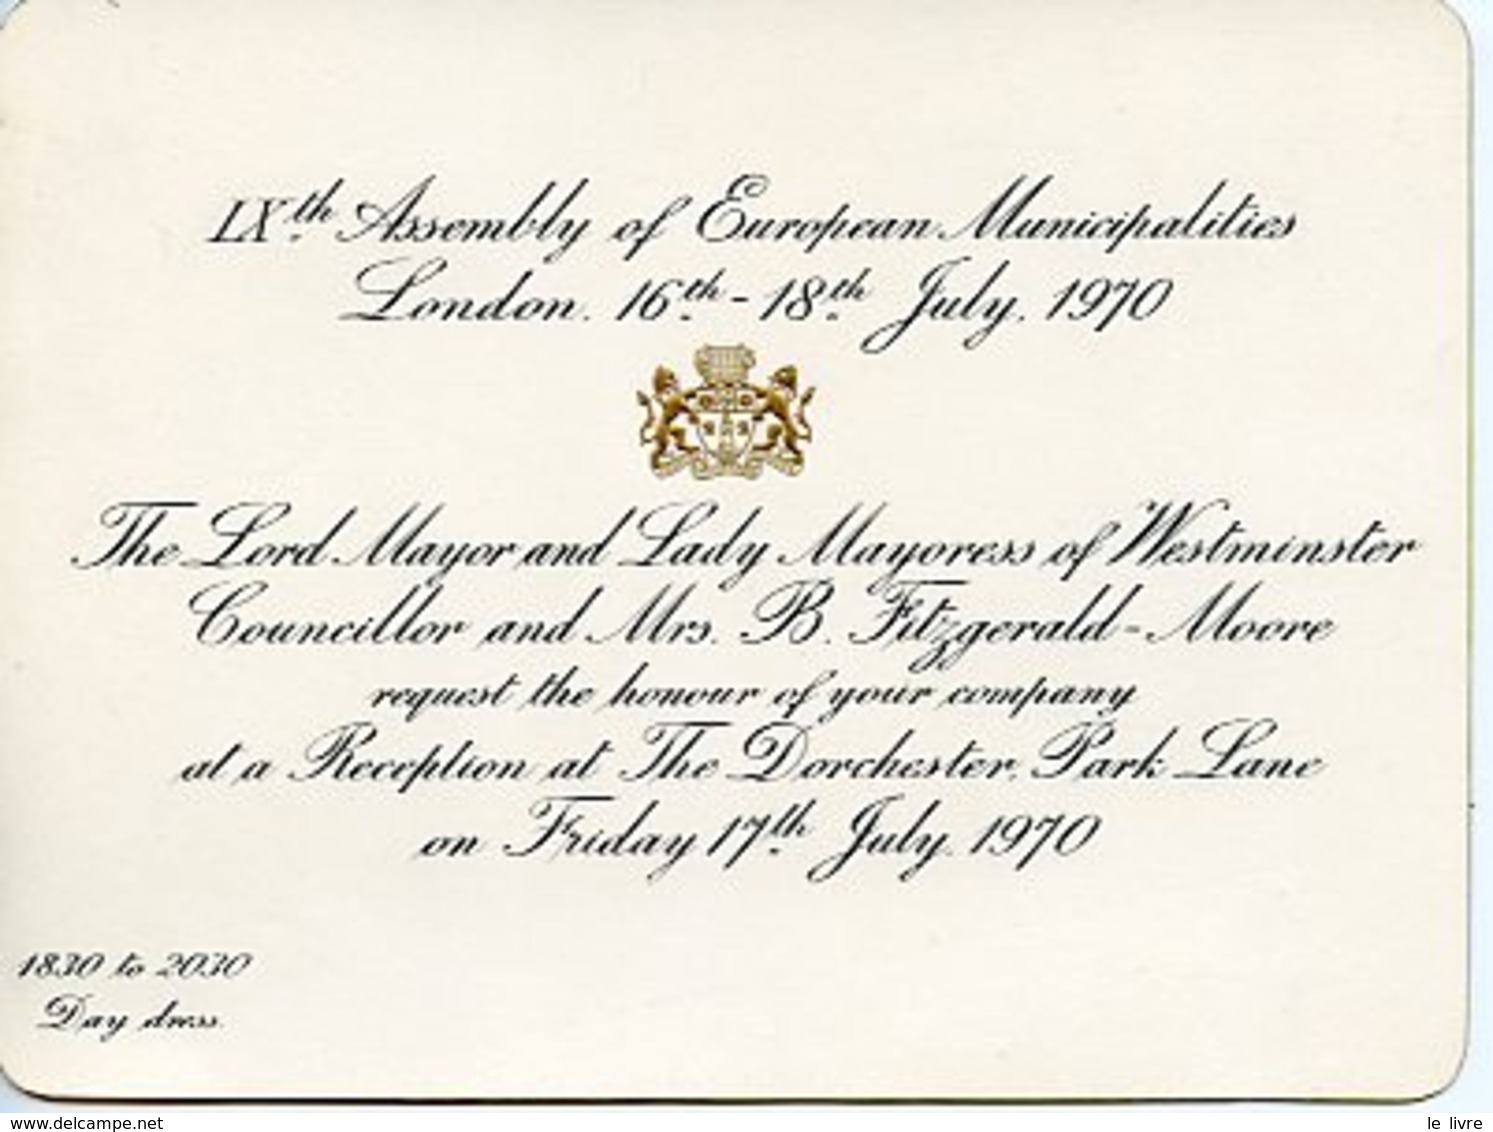 GRAND BRISTOL INVITATION LX ASSEMBLY OF EUROPEAN MUNICIPALITIES LONDON 1970 THE LORD MAYOR AND LADY...WESTMINSTER